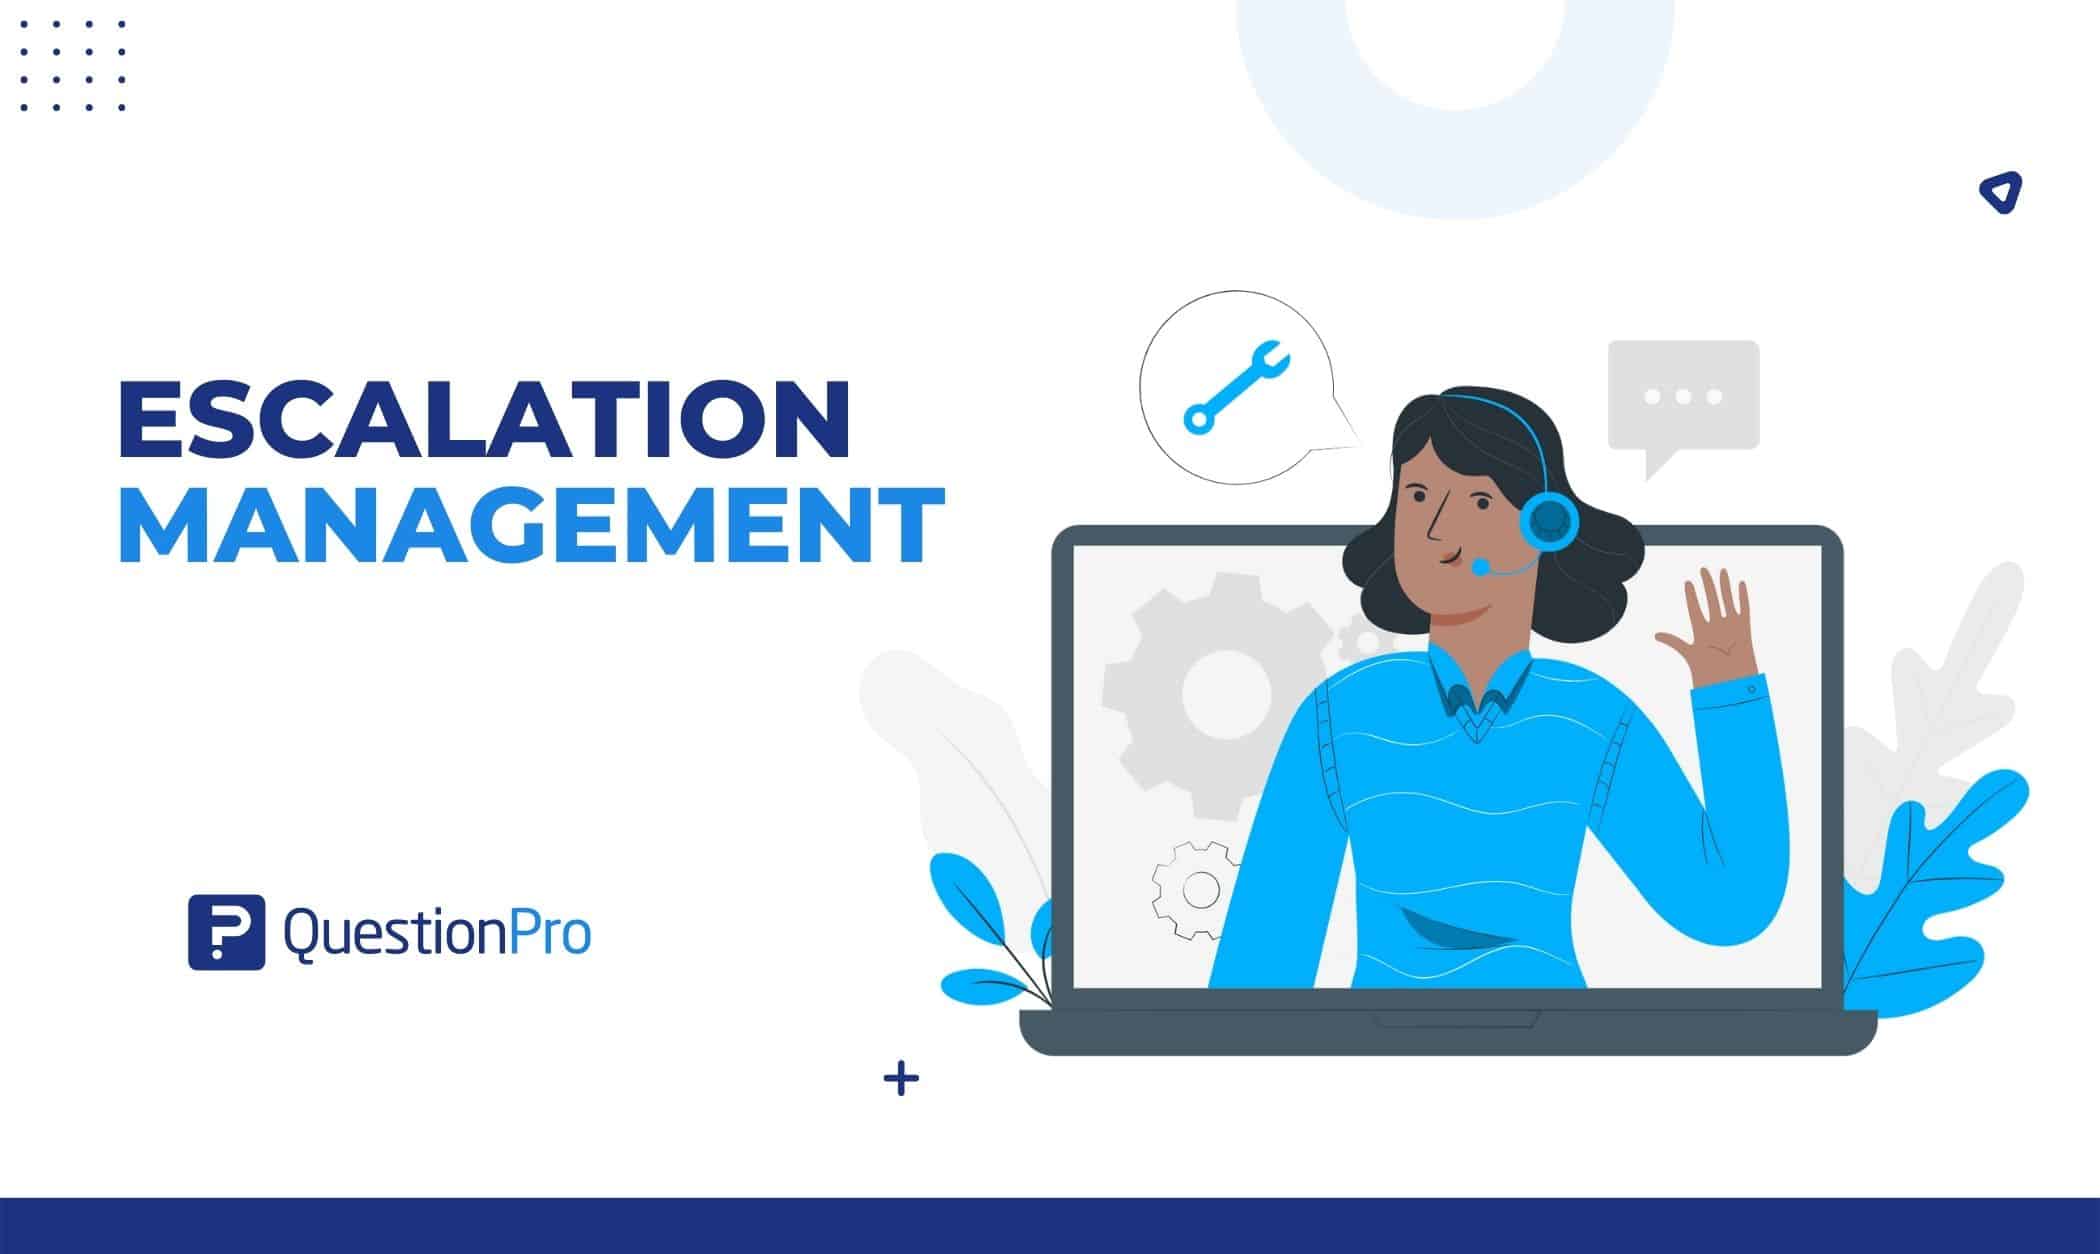 Escalation management boosts customer happiness. The process clarifies risk-management and communication decisions. Learn more about it.